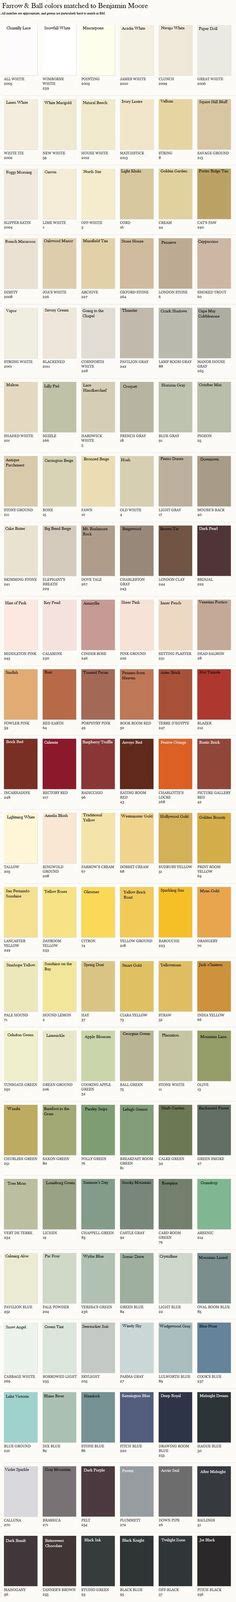 Farrow And Ball Paint Colors Matched To Benjamin Moore Colors Everything